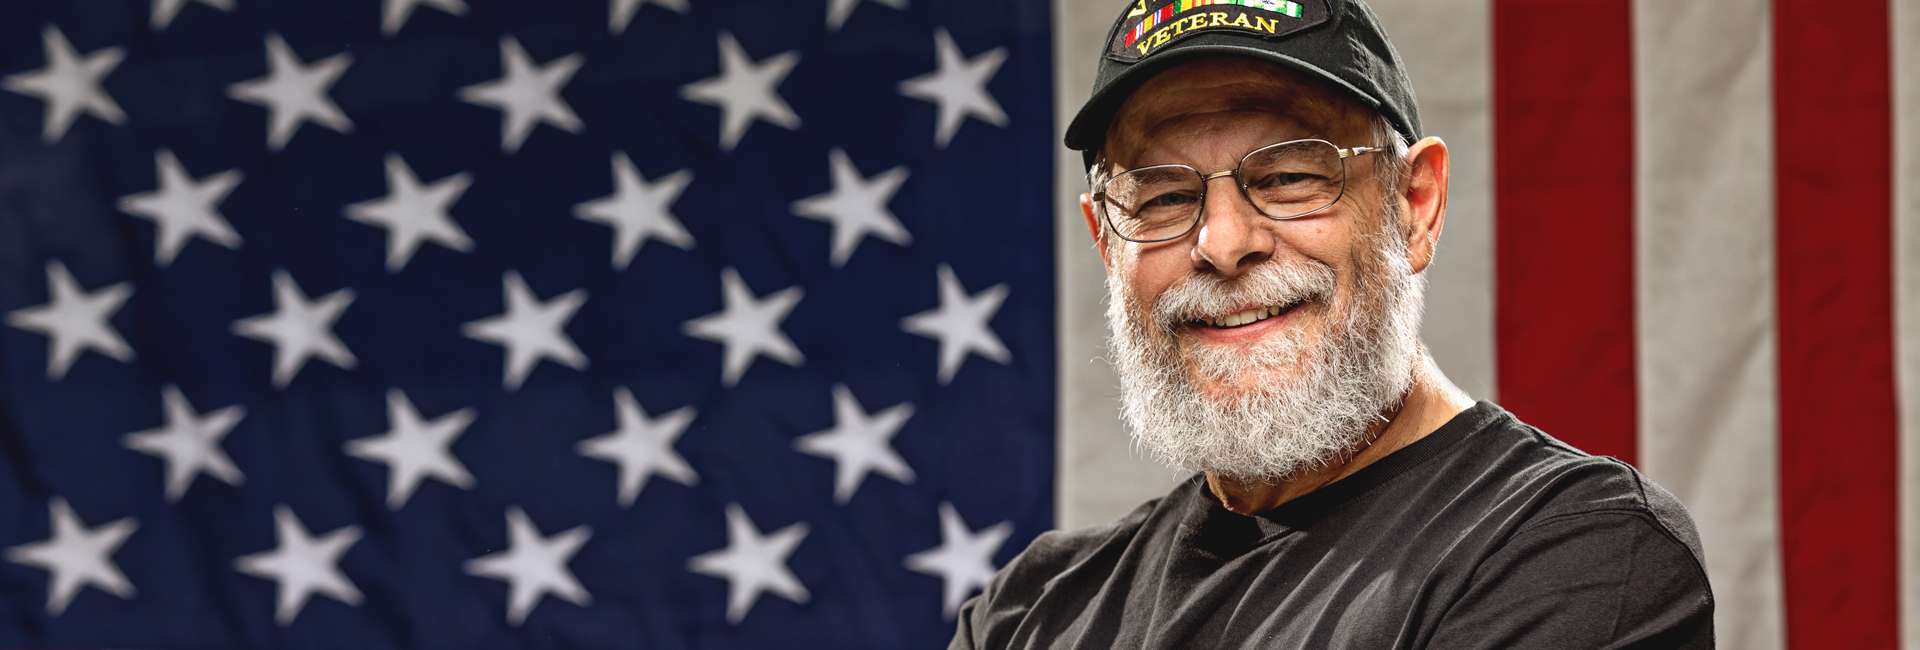 Vietnam Veteran with a beard standing in front of an American flag.